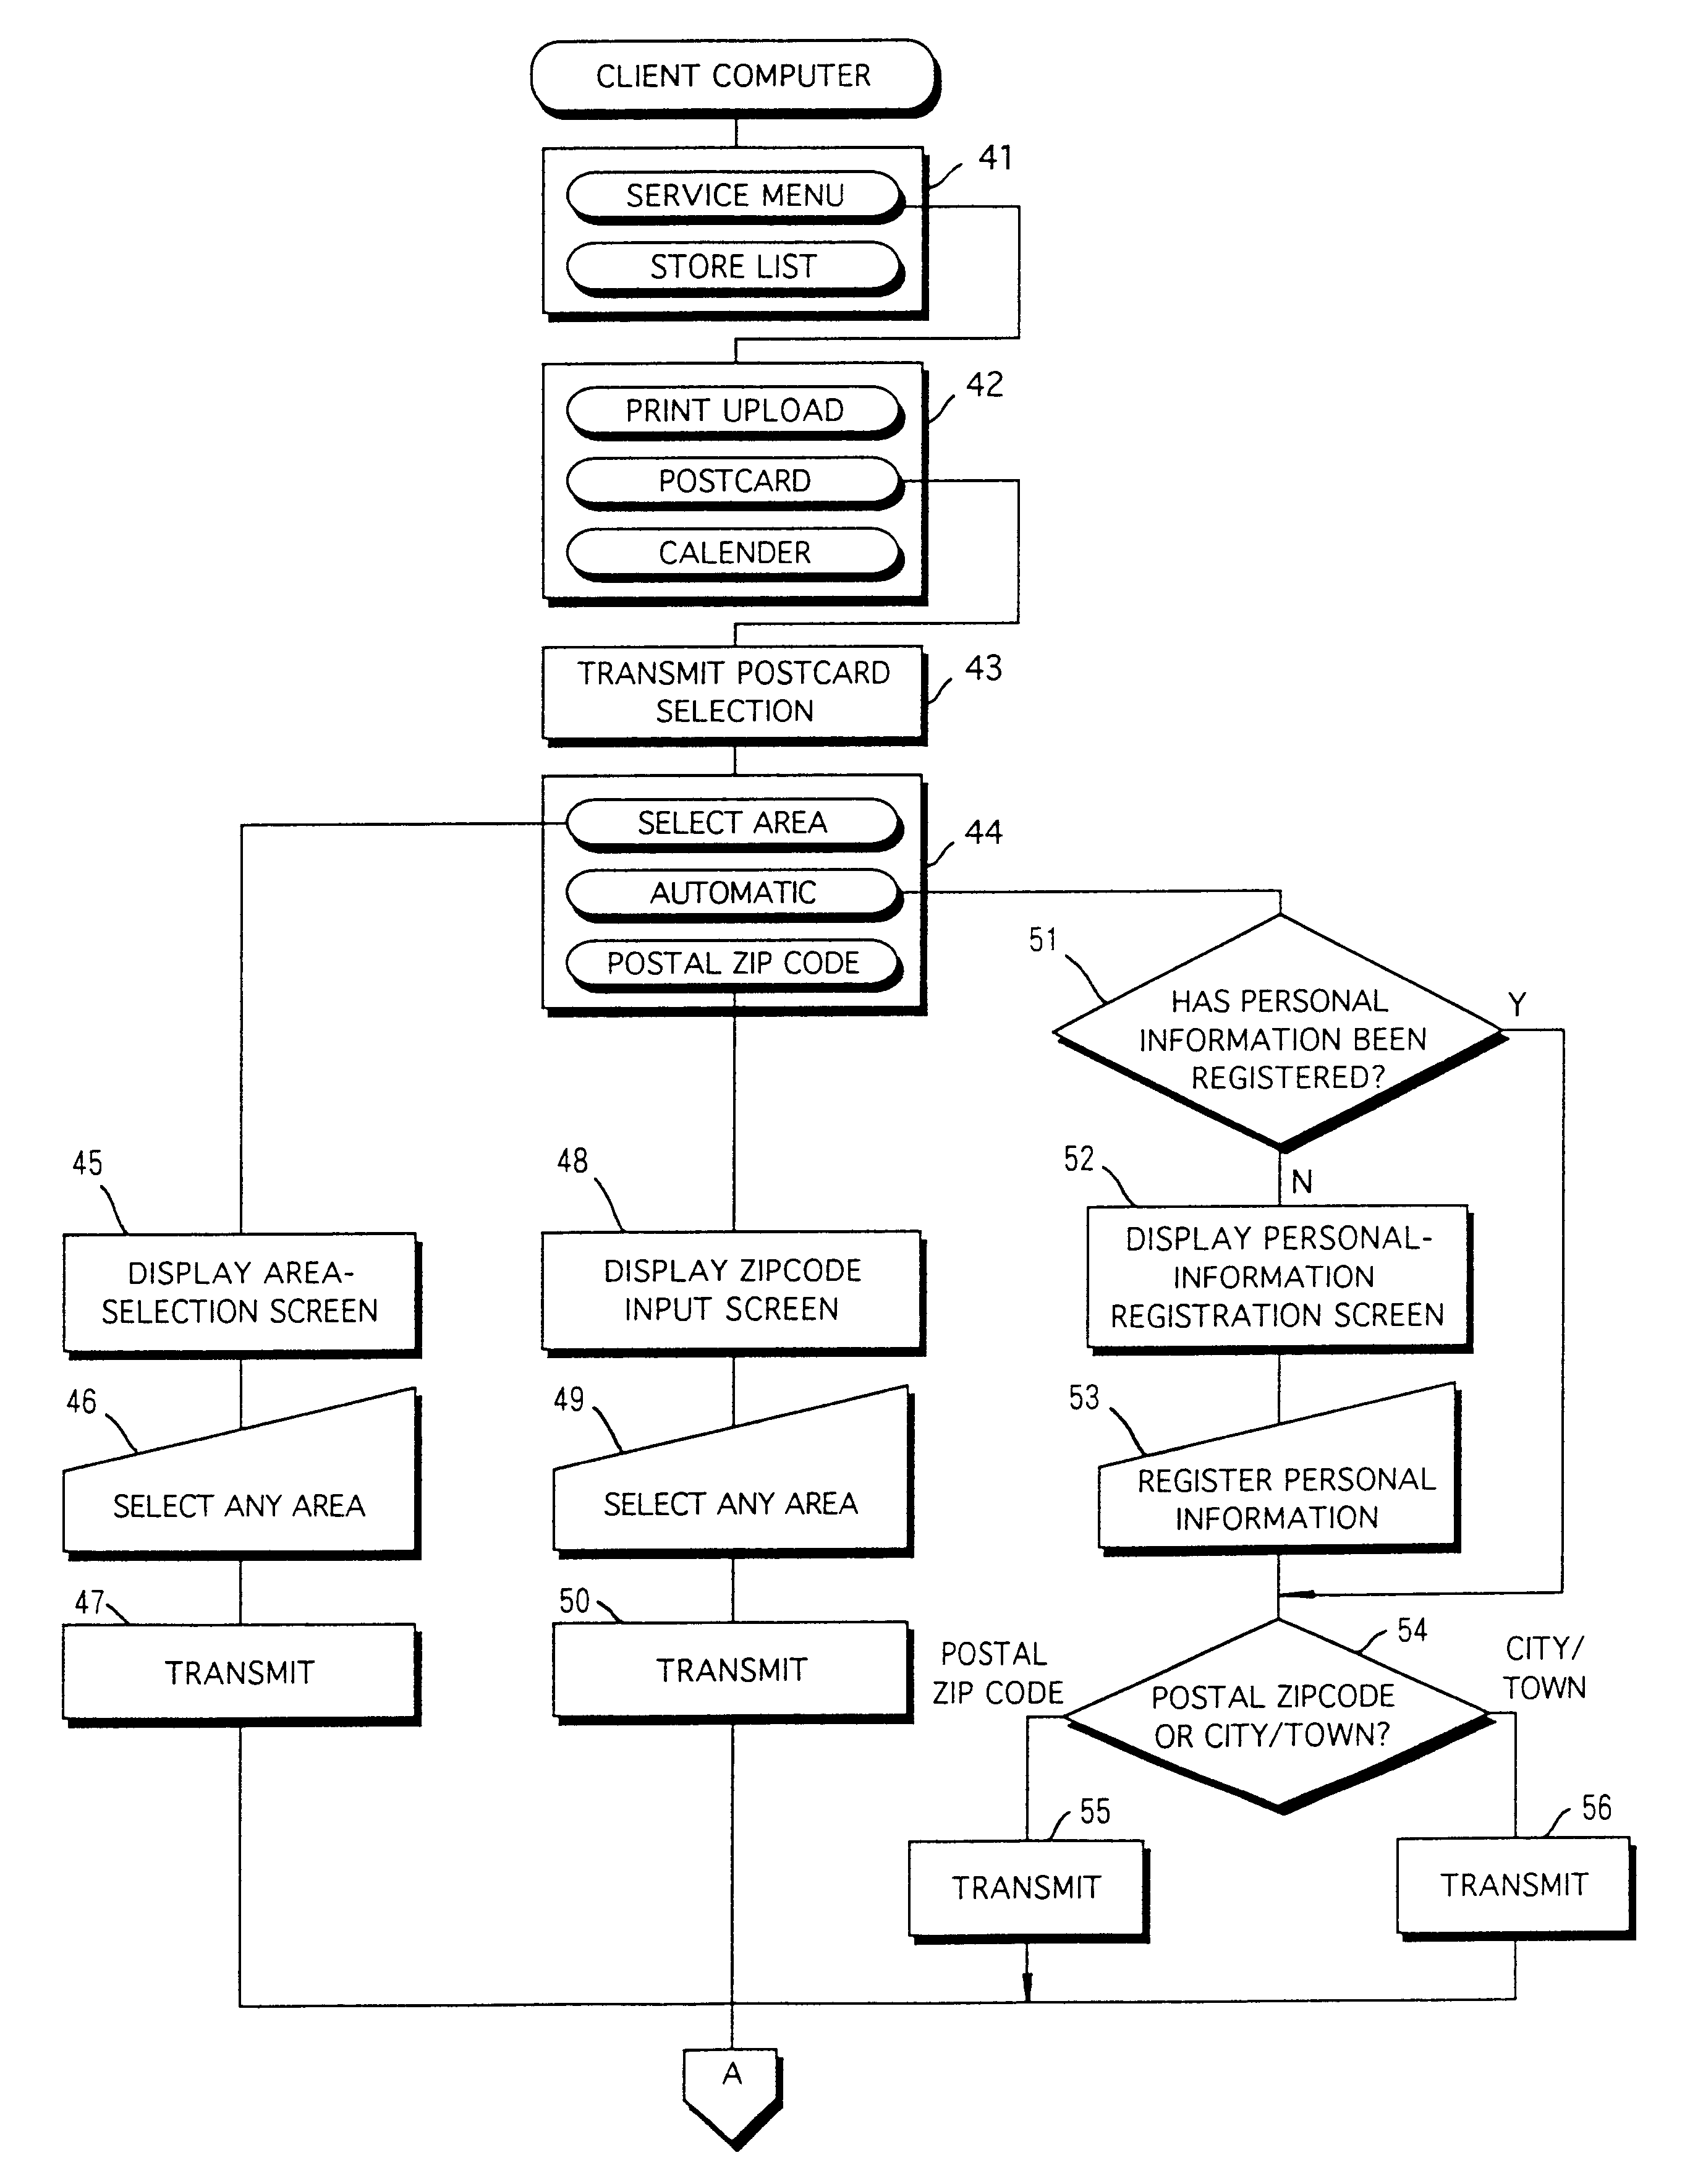 System and method for ordering printing of images, and system and method for printing edited images